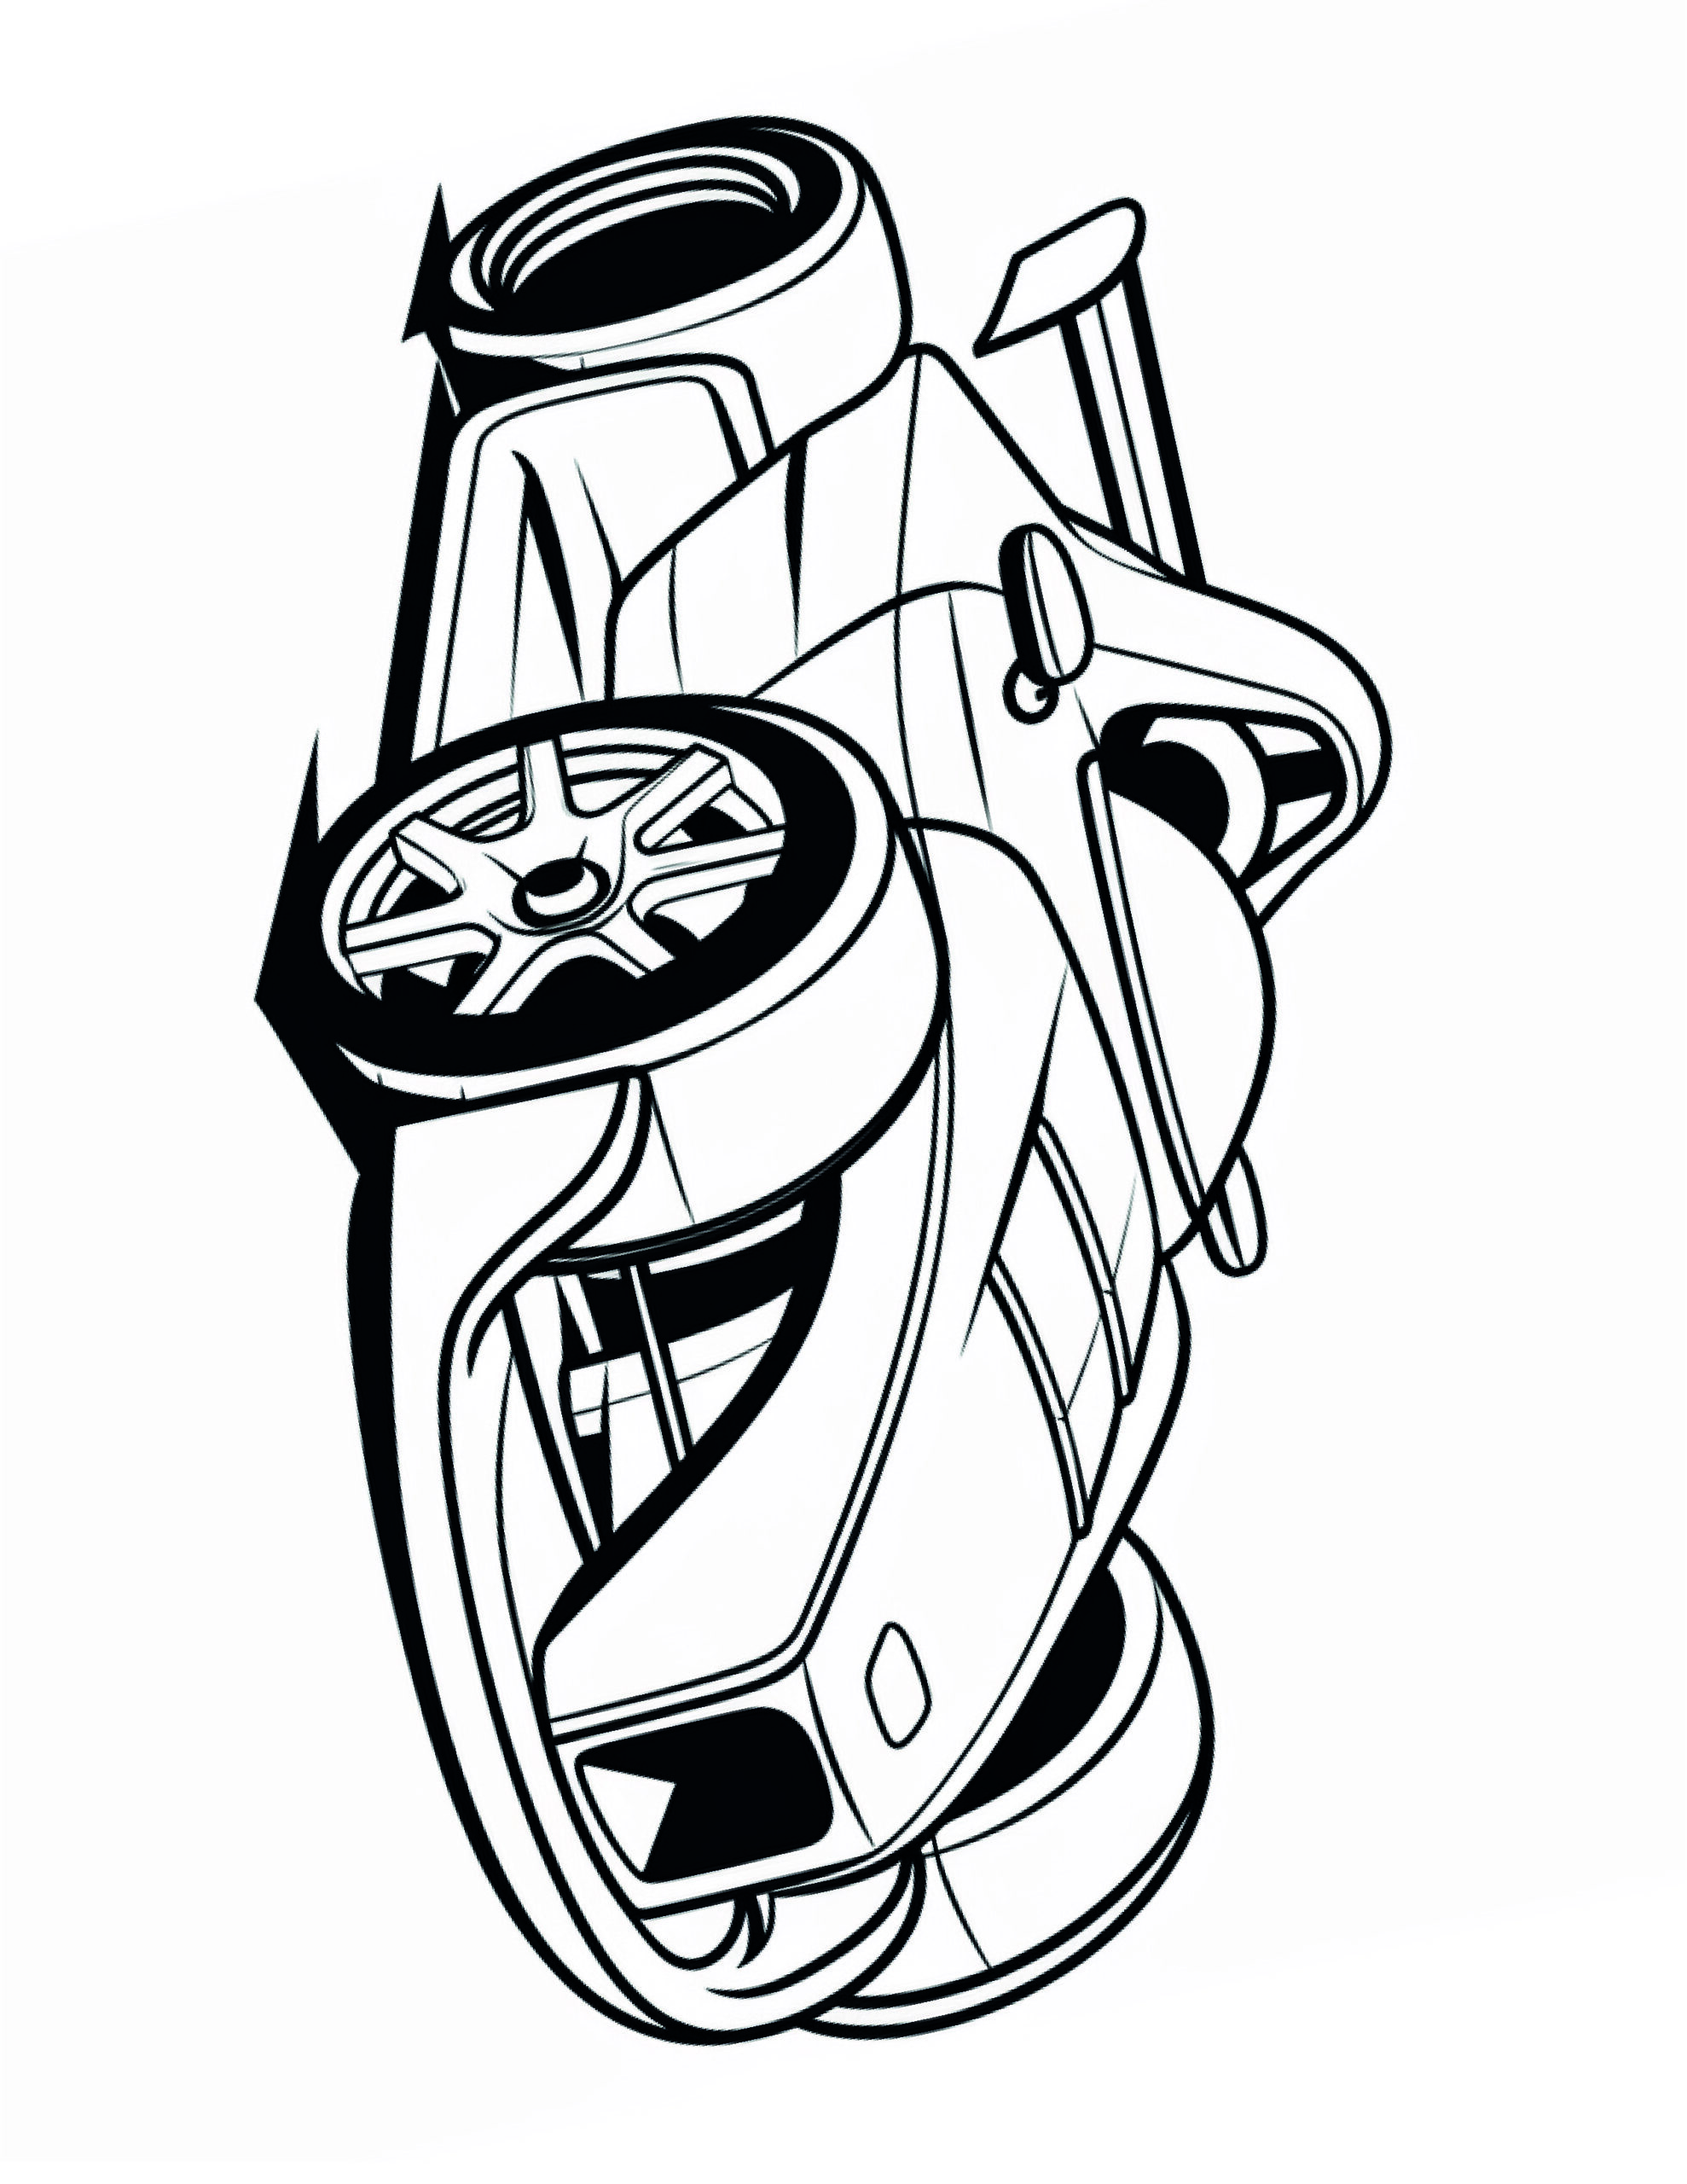 Race Car Coloring Page 8 - A line drawing of a formula one car with alloy wheels and a cool design.